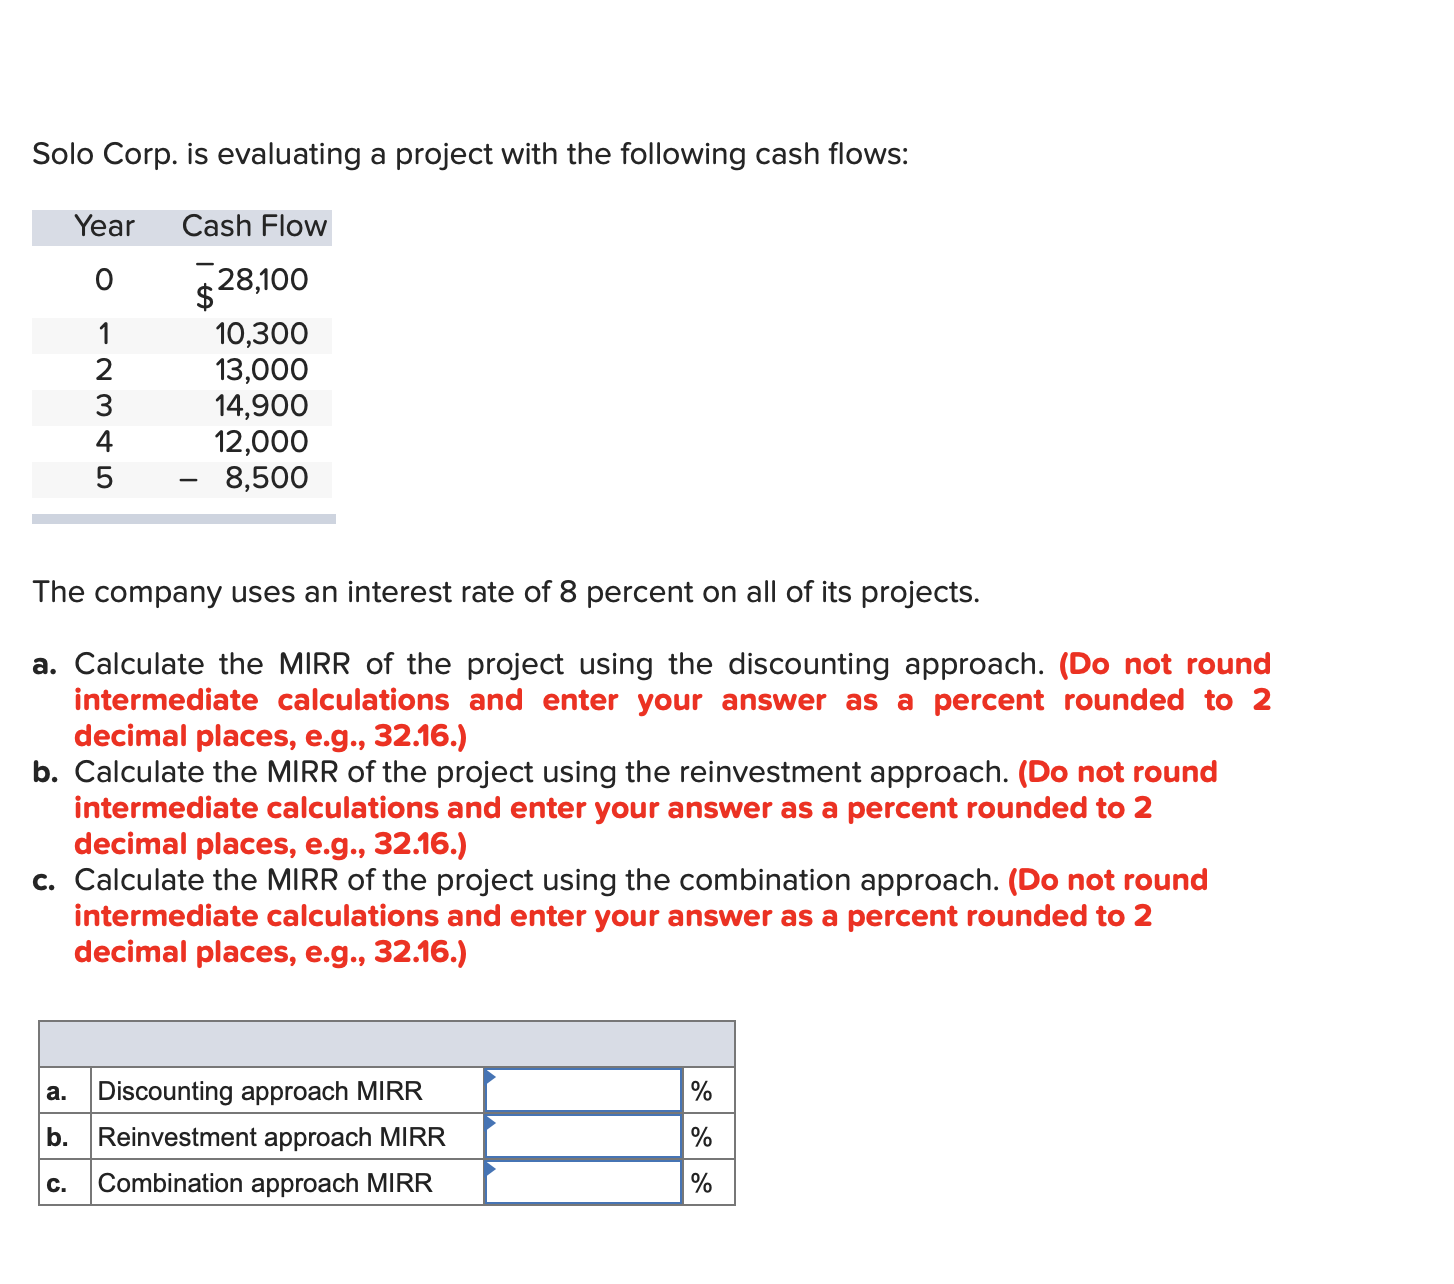 The company uses an interest rate of 8 percent on all of its projects.
a. Calculate the MIRR of the project using the discounting approach. (Do not round
intermediate calculations and enter your answer as a percent rounded to 2
decimal places, e.g., 32.16.)
b. Calculate the MIRR of the project using the reinvestment approach. (Do not round
intermediate calculations and enter your answer as a percent rounded to 2
decimal places, e.g., 32.16.)
c. Calculate the MIRR of the project using the combination approach. (Do not round
intermediate calculations and enter your answer as a percent rounded to 2
decimal places, e.g., 32.16.)
